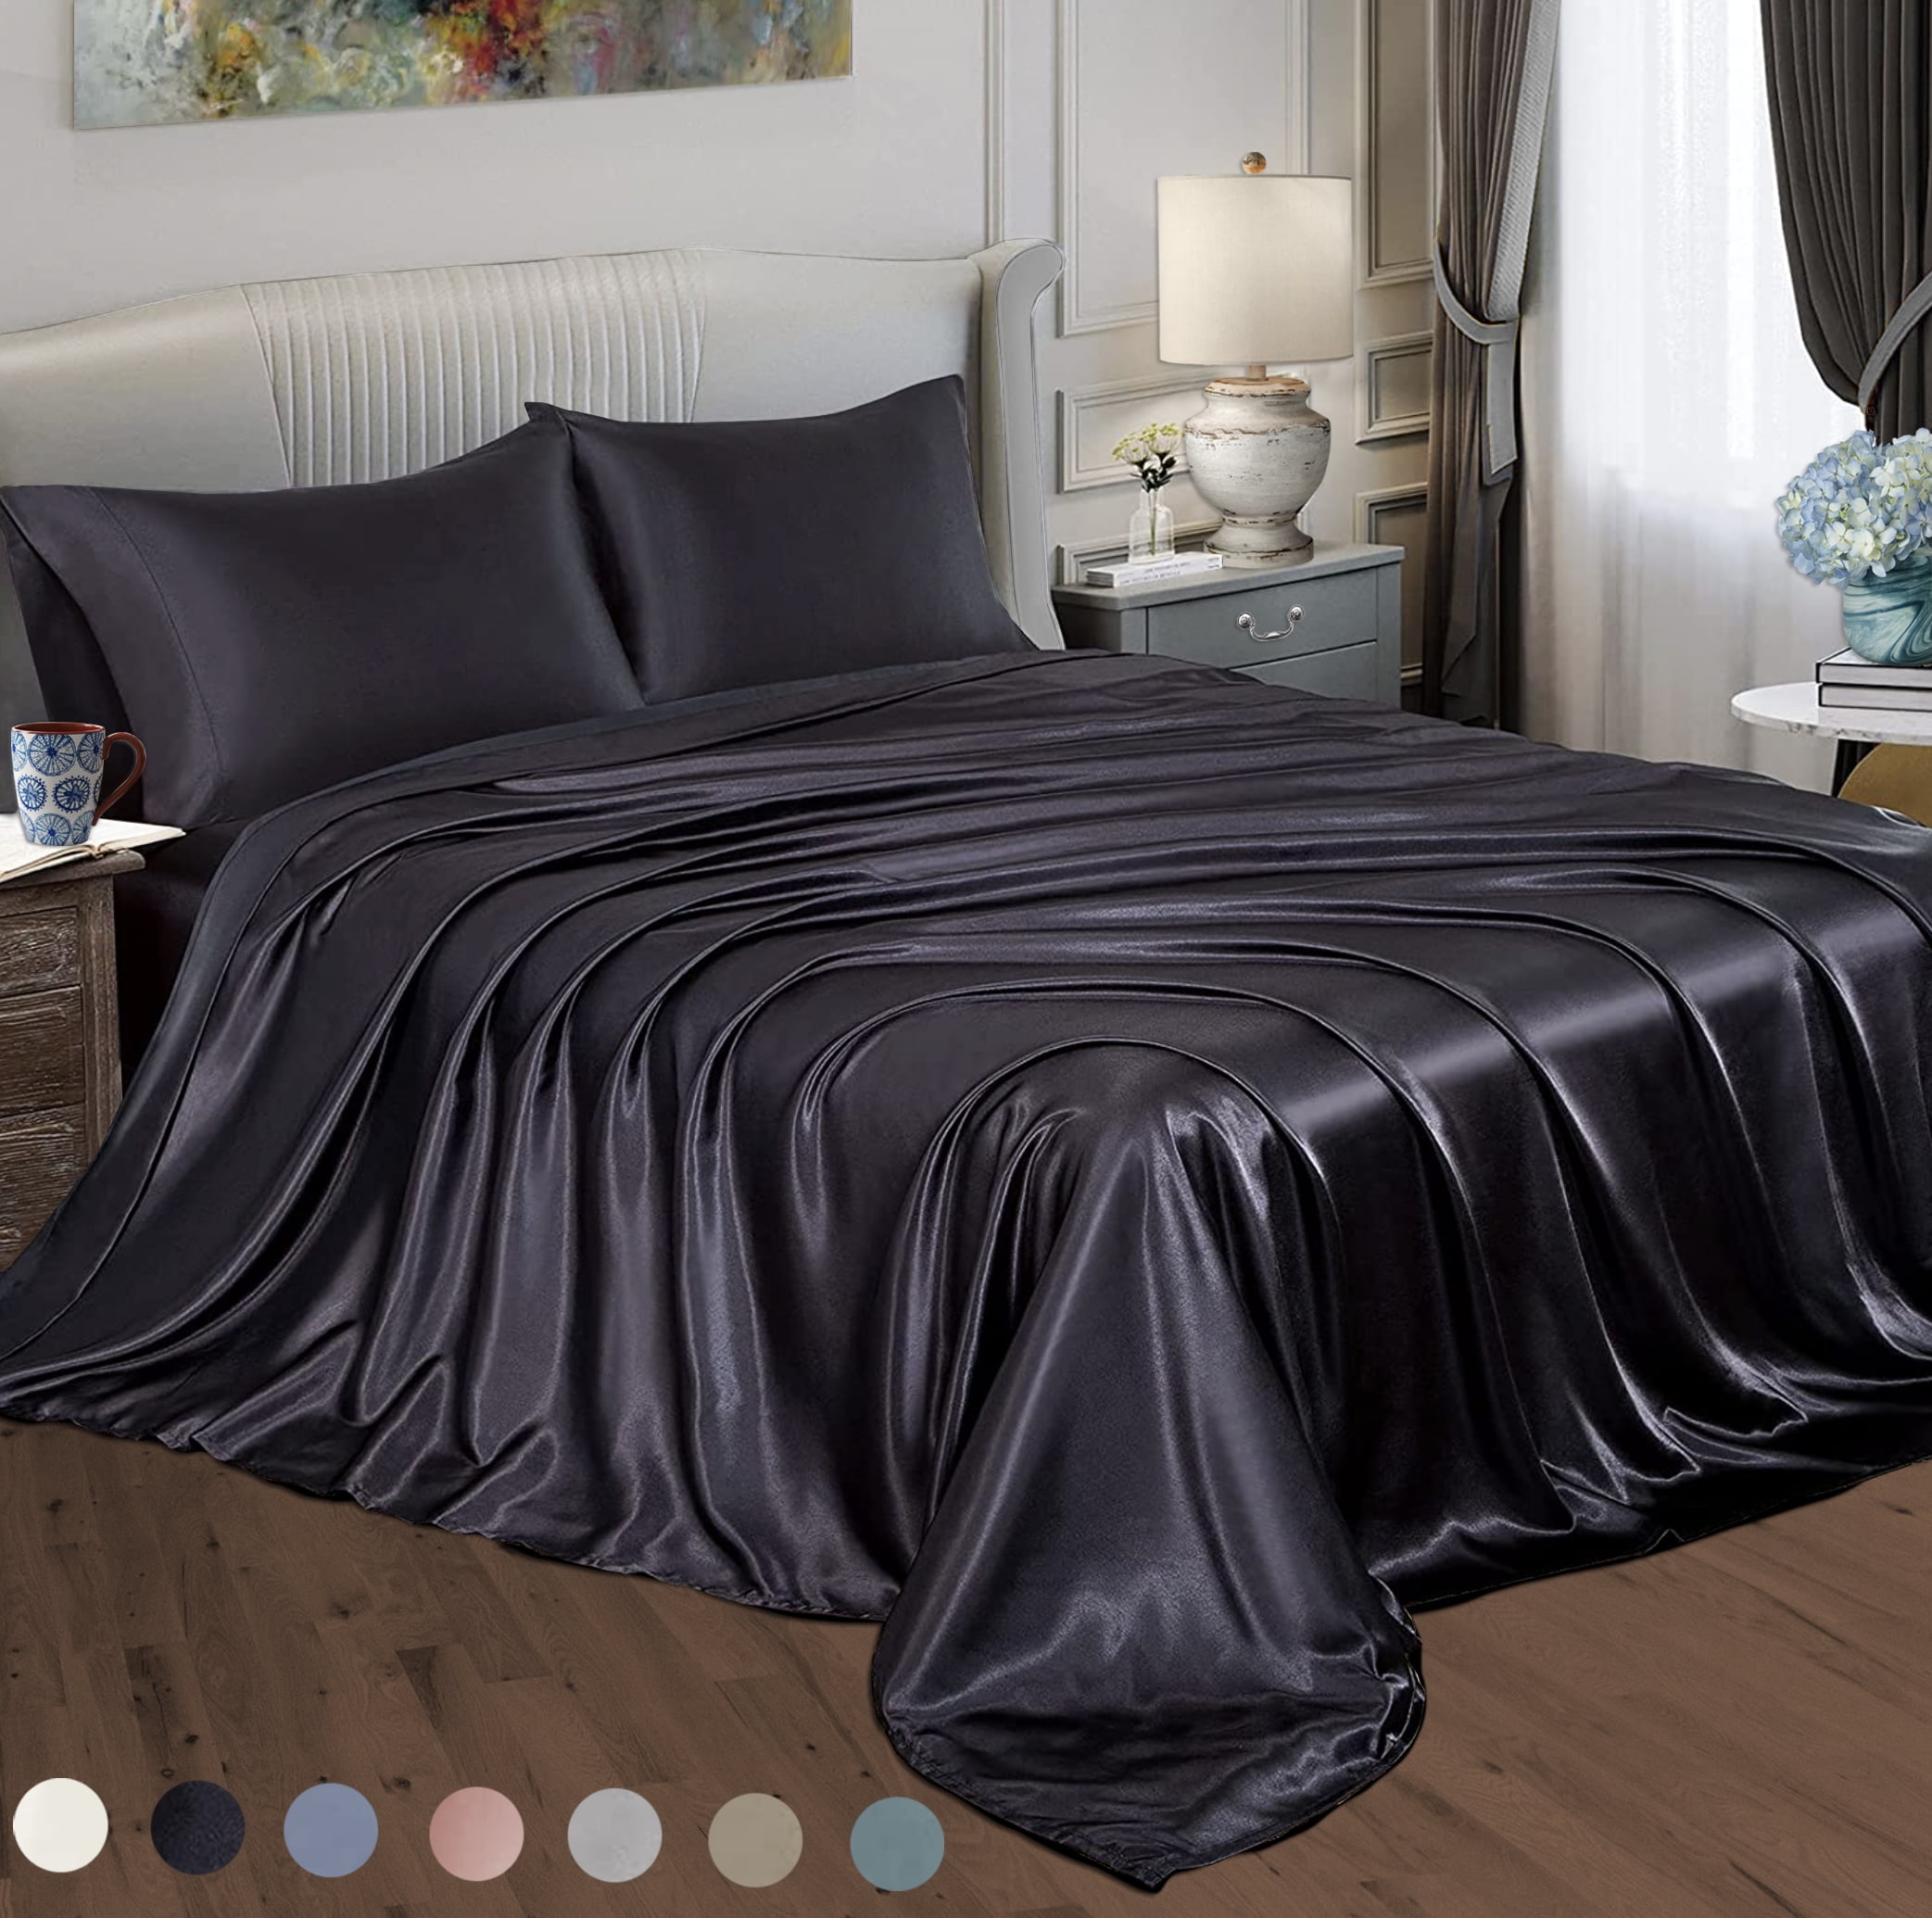 Homiest Black Satin Fitted Sheet Twin XL Size Fitted Bed Sheet, Deep Pocket  Fitted Sheet Only, Luxury & Ultra Soft Bedding Fitted Sheet Single Bottom